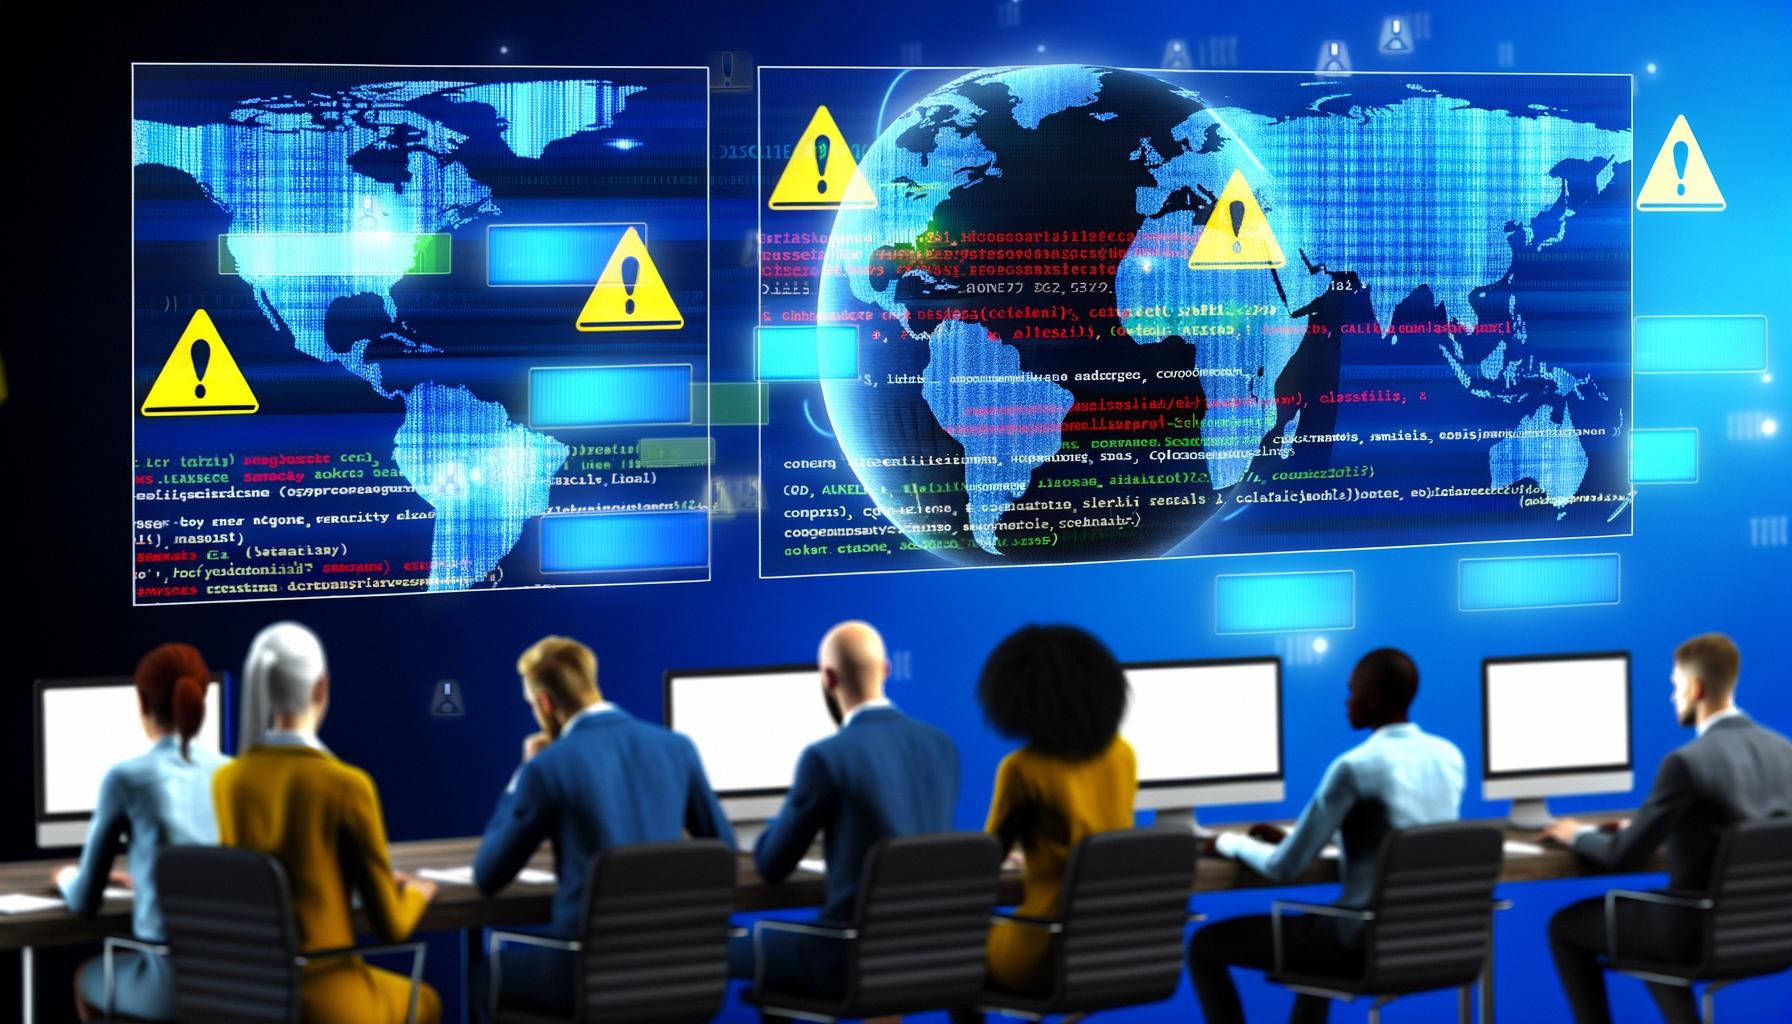 Cybersecurity concerns escalate globally